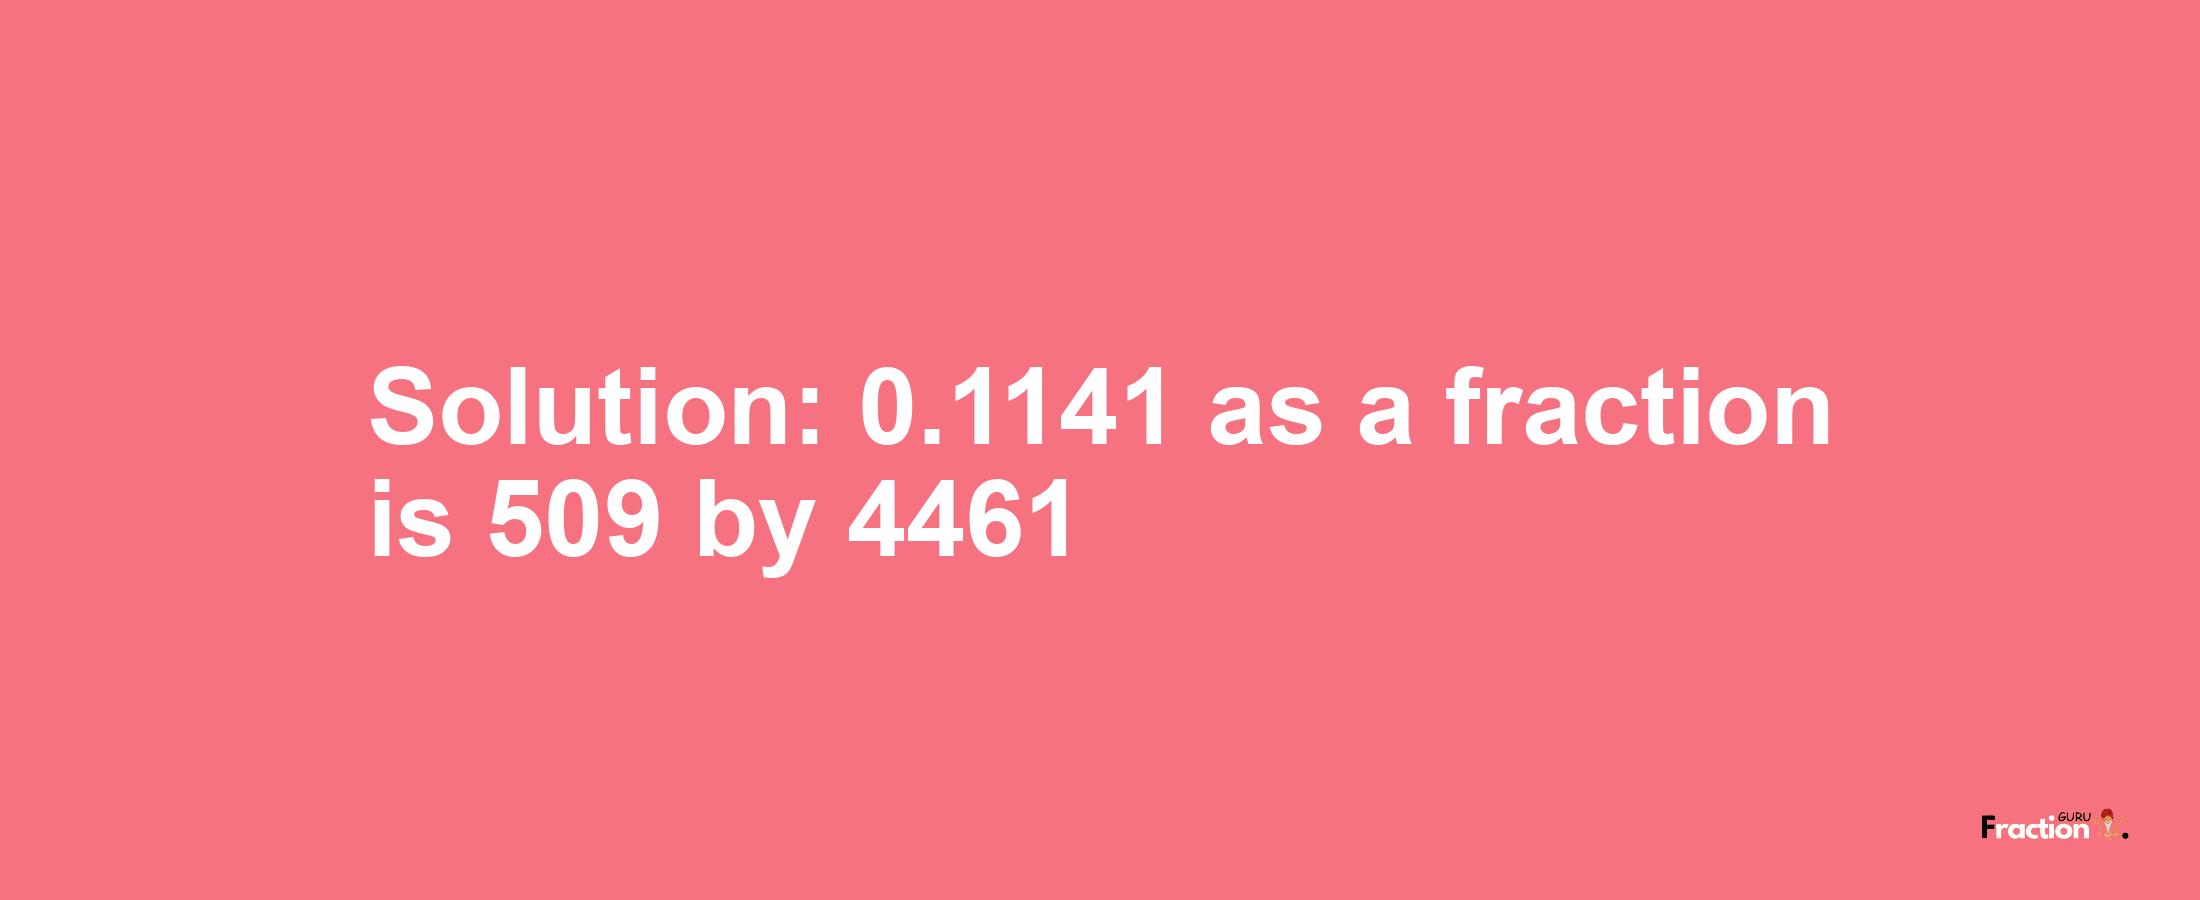 Solution:0.1141 as a fraction is 509/4461